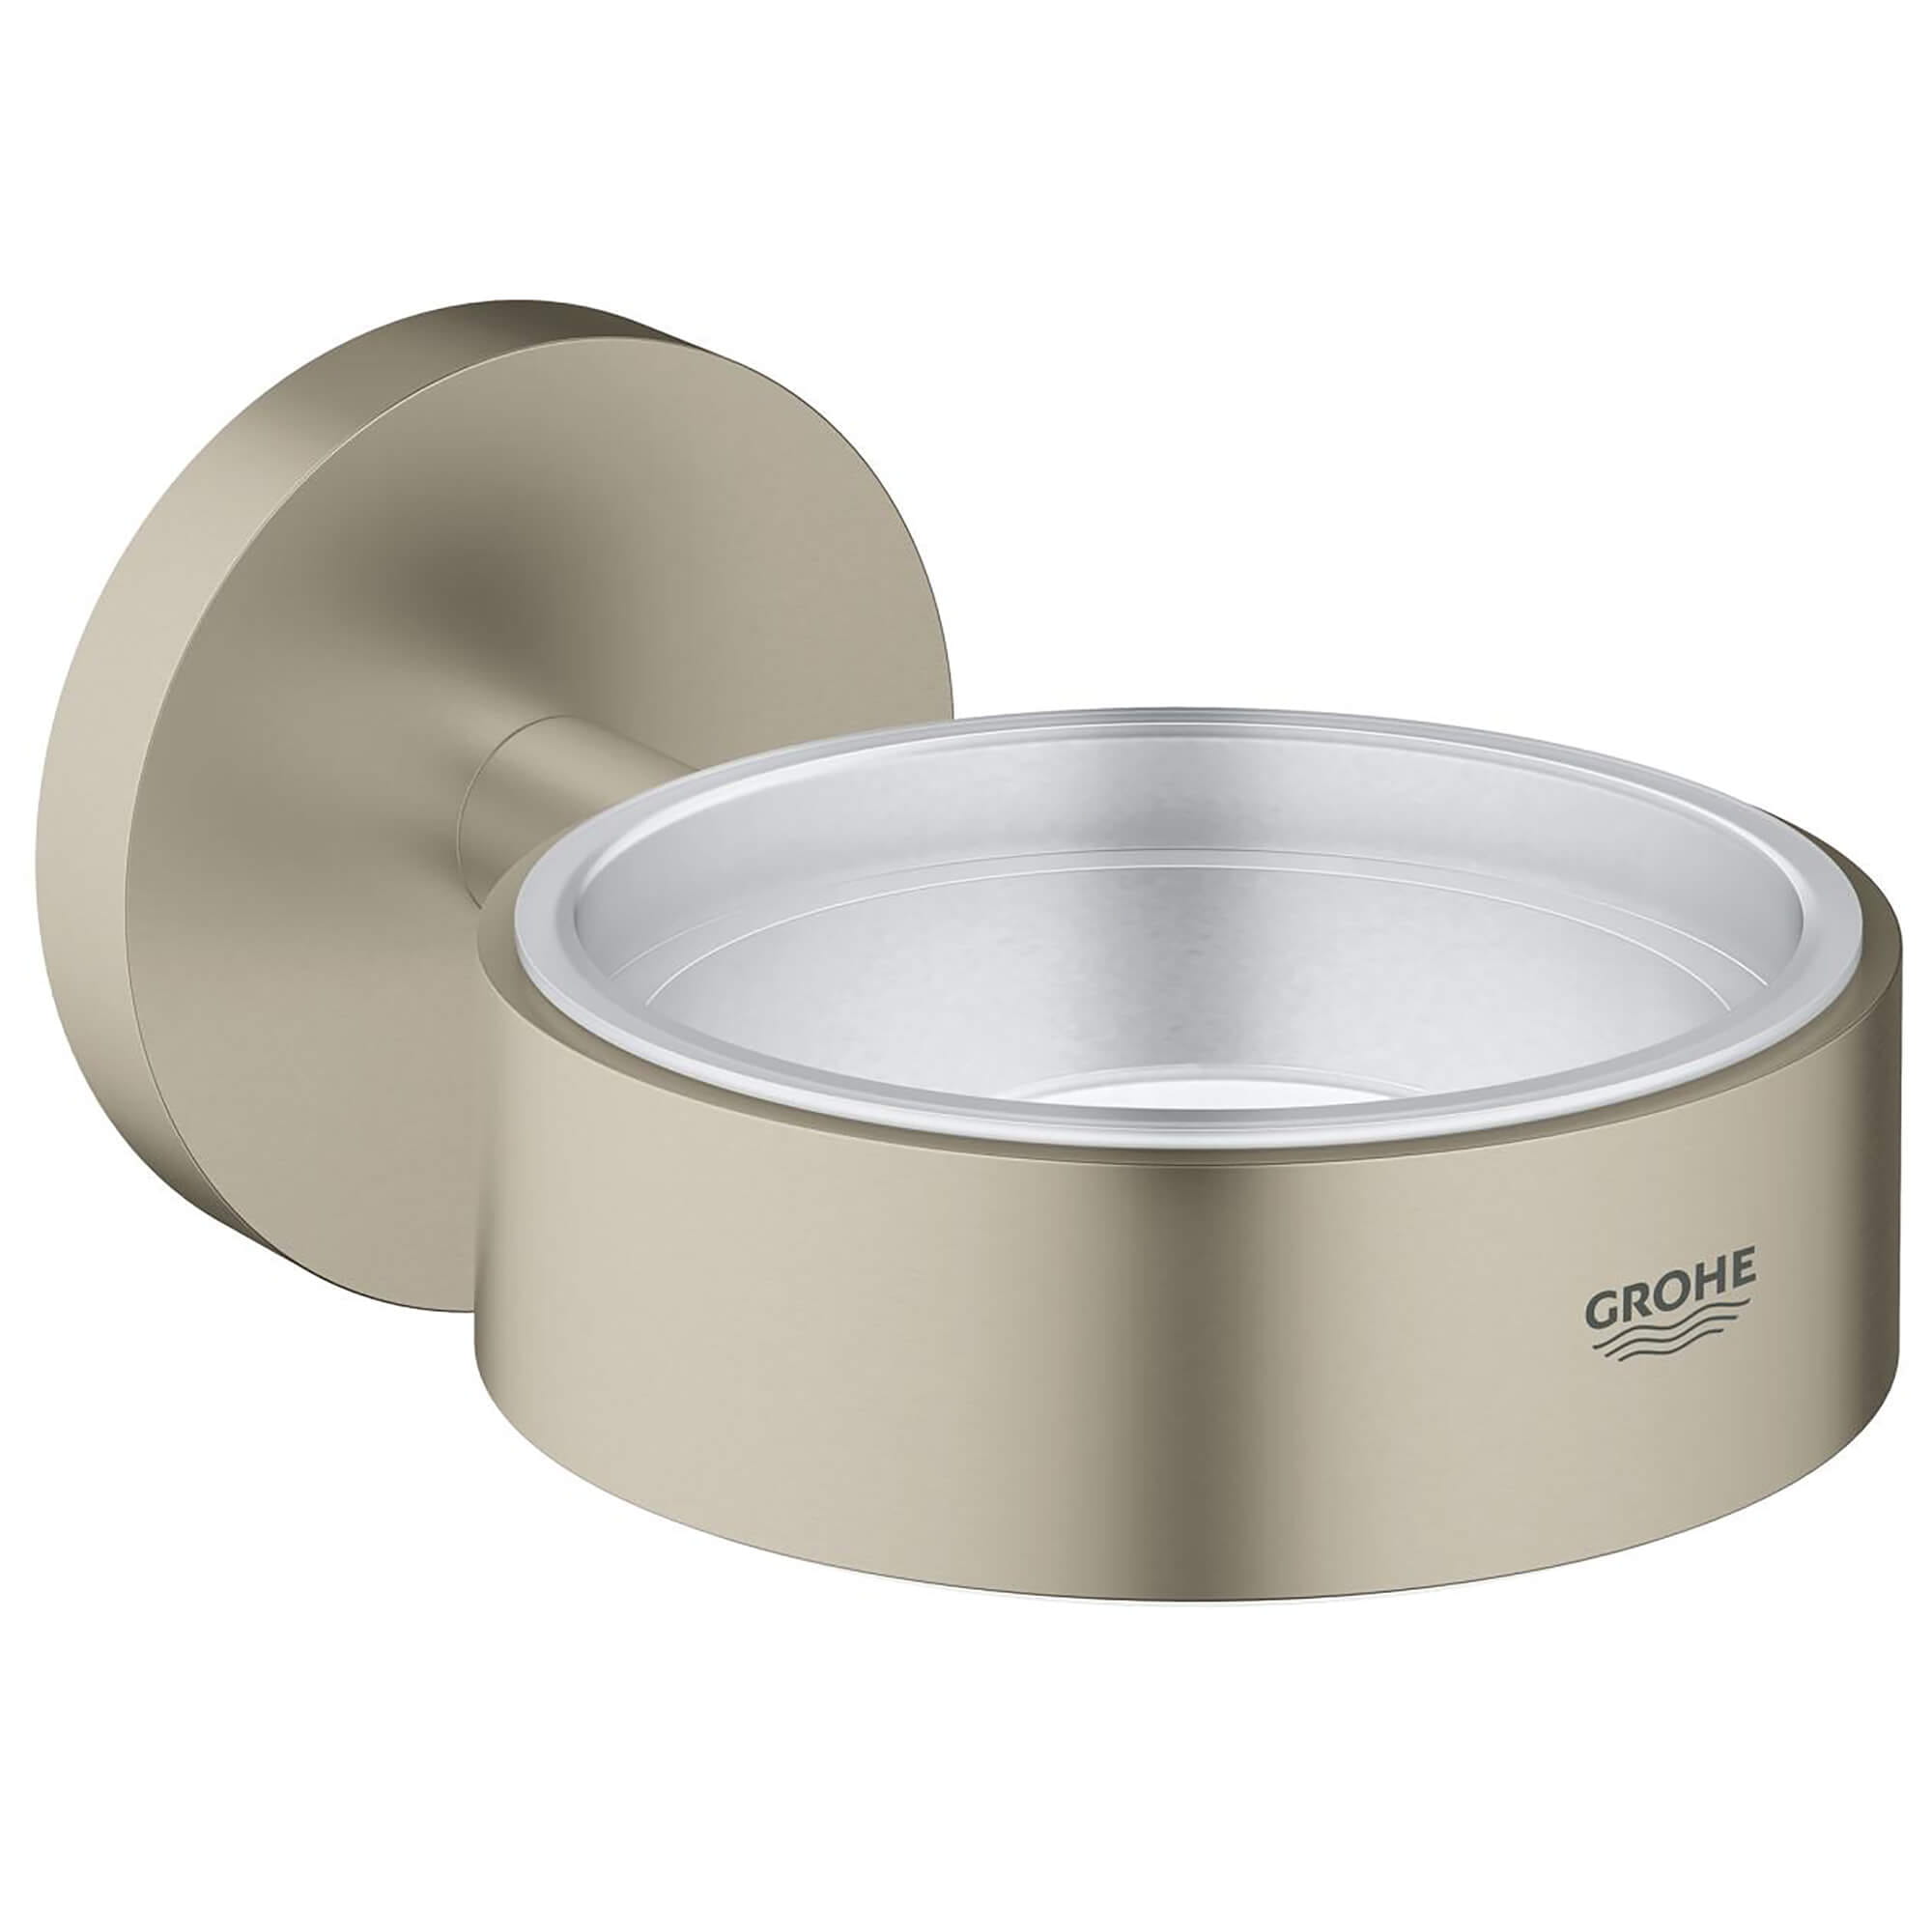 Support verre a dent ou porte savon GROHE BRUSHED NICKEL